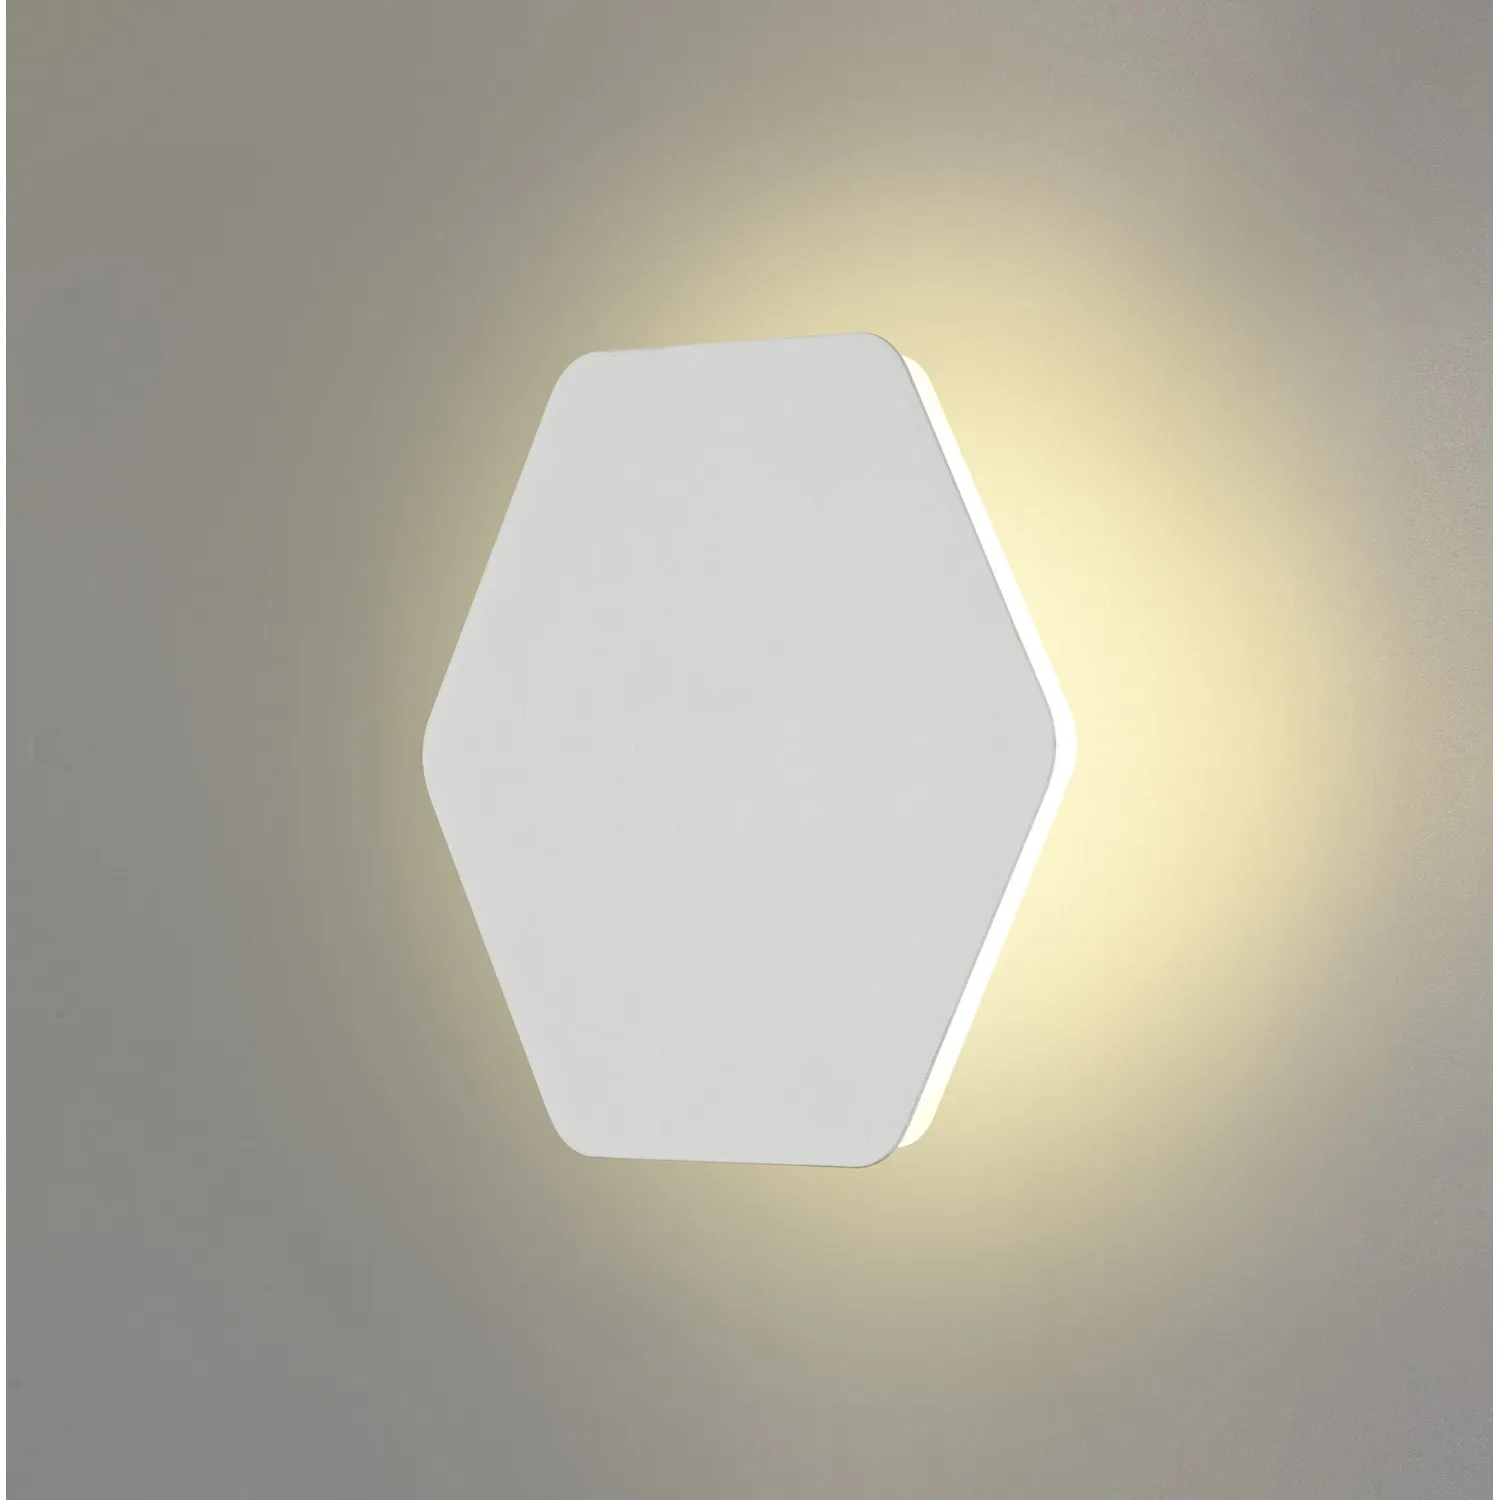 Edgware Magnetic Base Wall Lamp, 12W LED 3000K 498lm, 20 19cm Horizontal Hexagonal Centre, Sand White Acrylic Frosted Diffuser